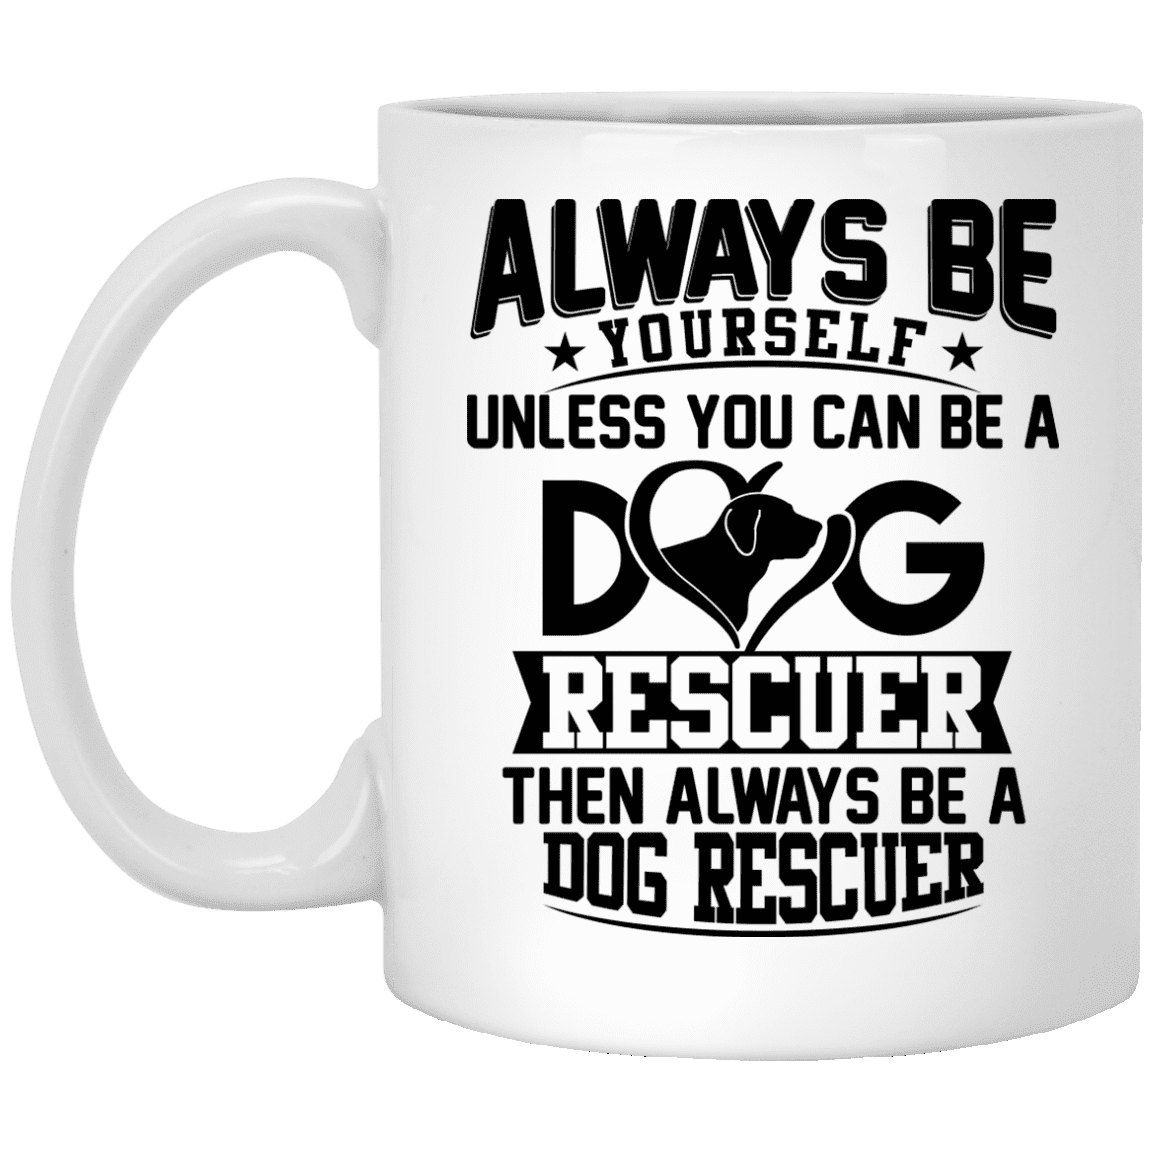 Always Be A Dog Rescuer - Mugs.